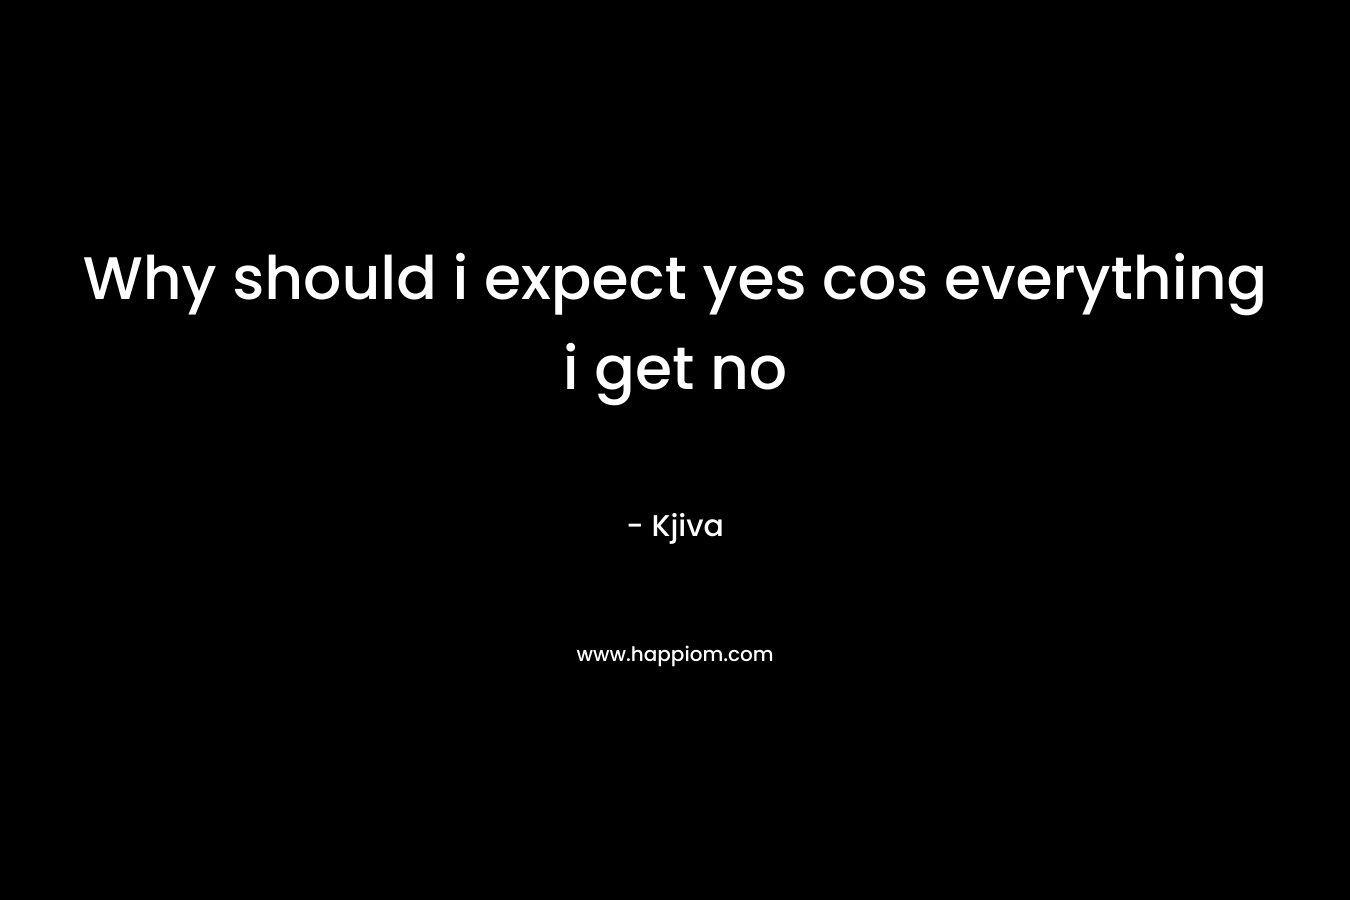 Why should i expect yes cos everything i get no